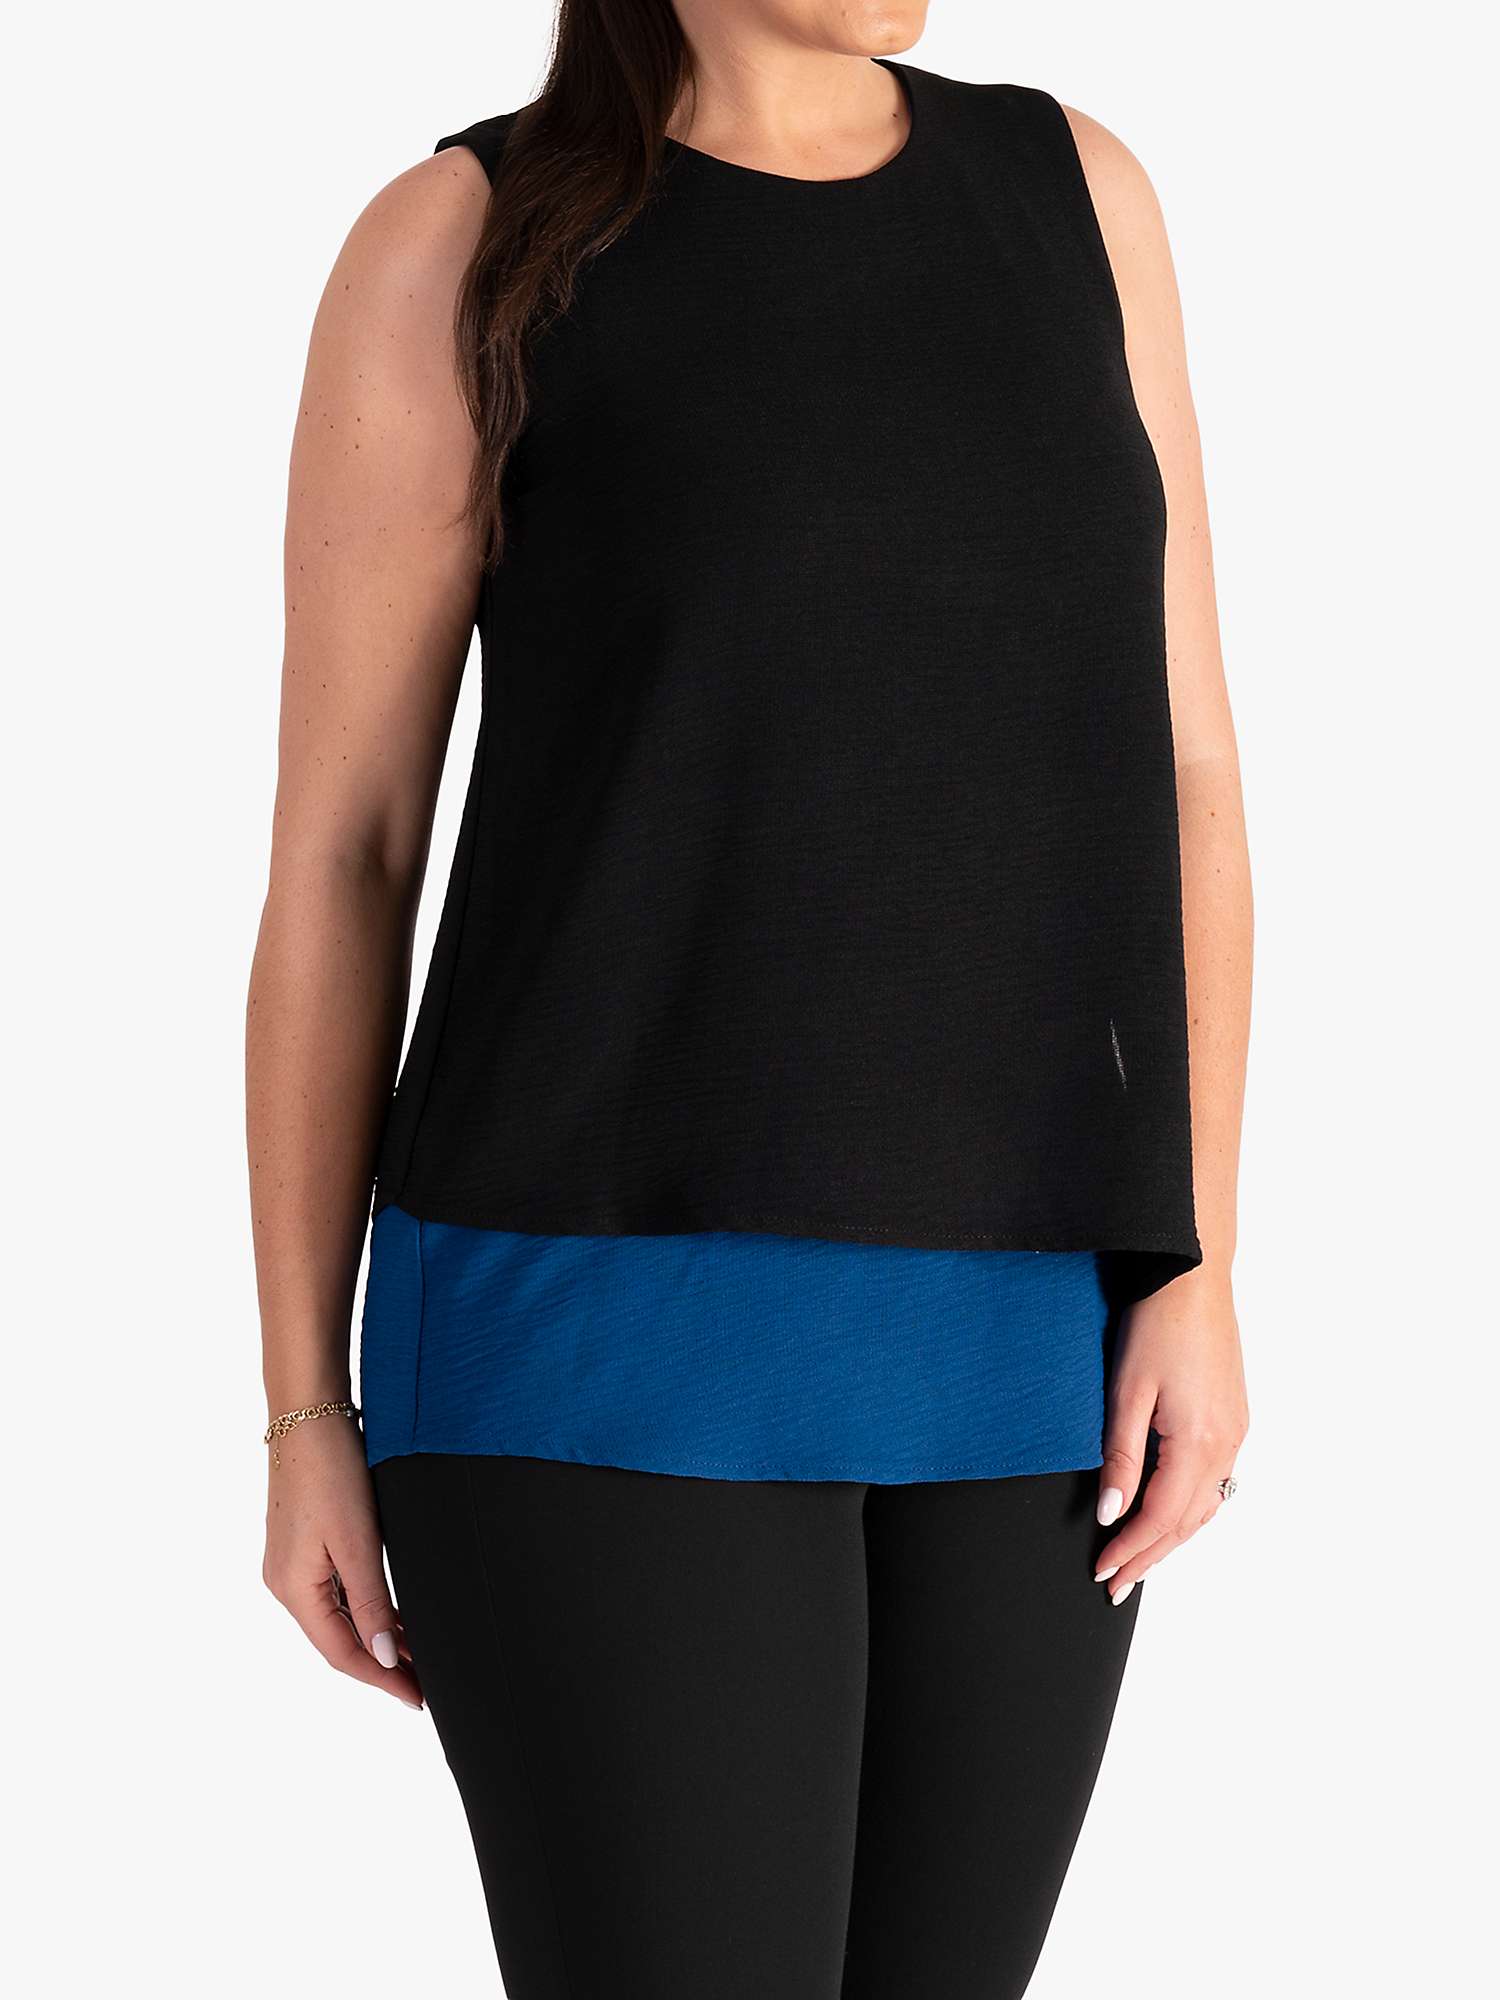 Buy chesca Contrast Layered Sleeveless Top, Black/Royal Blue Online at johnlewis.com